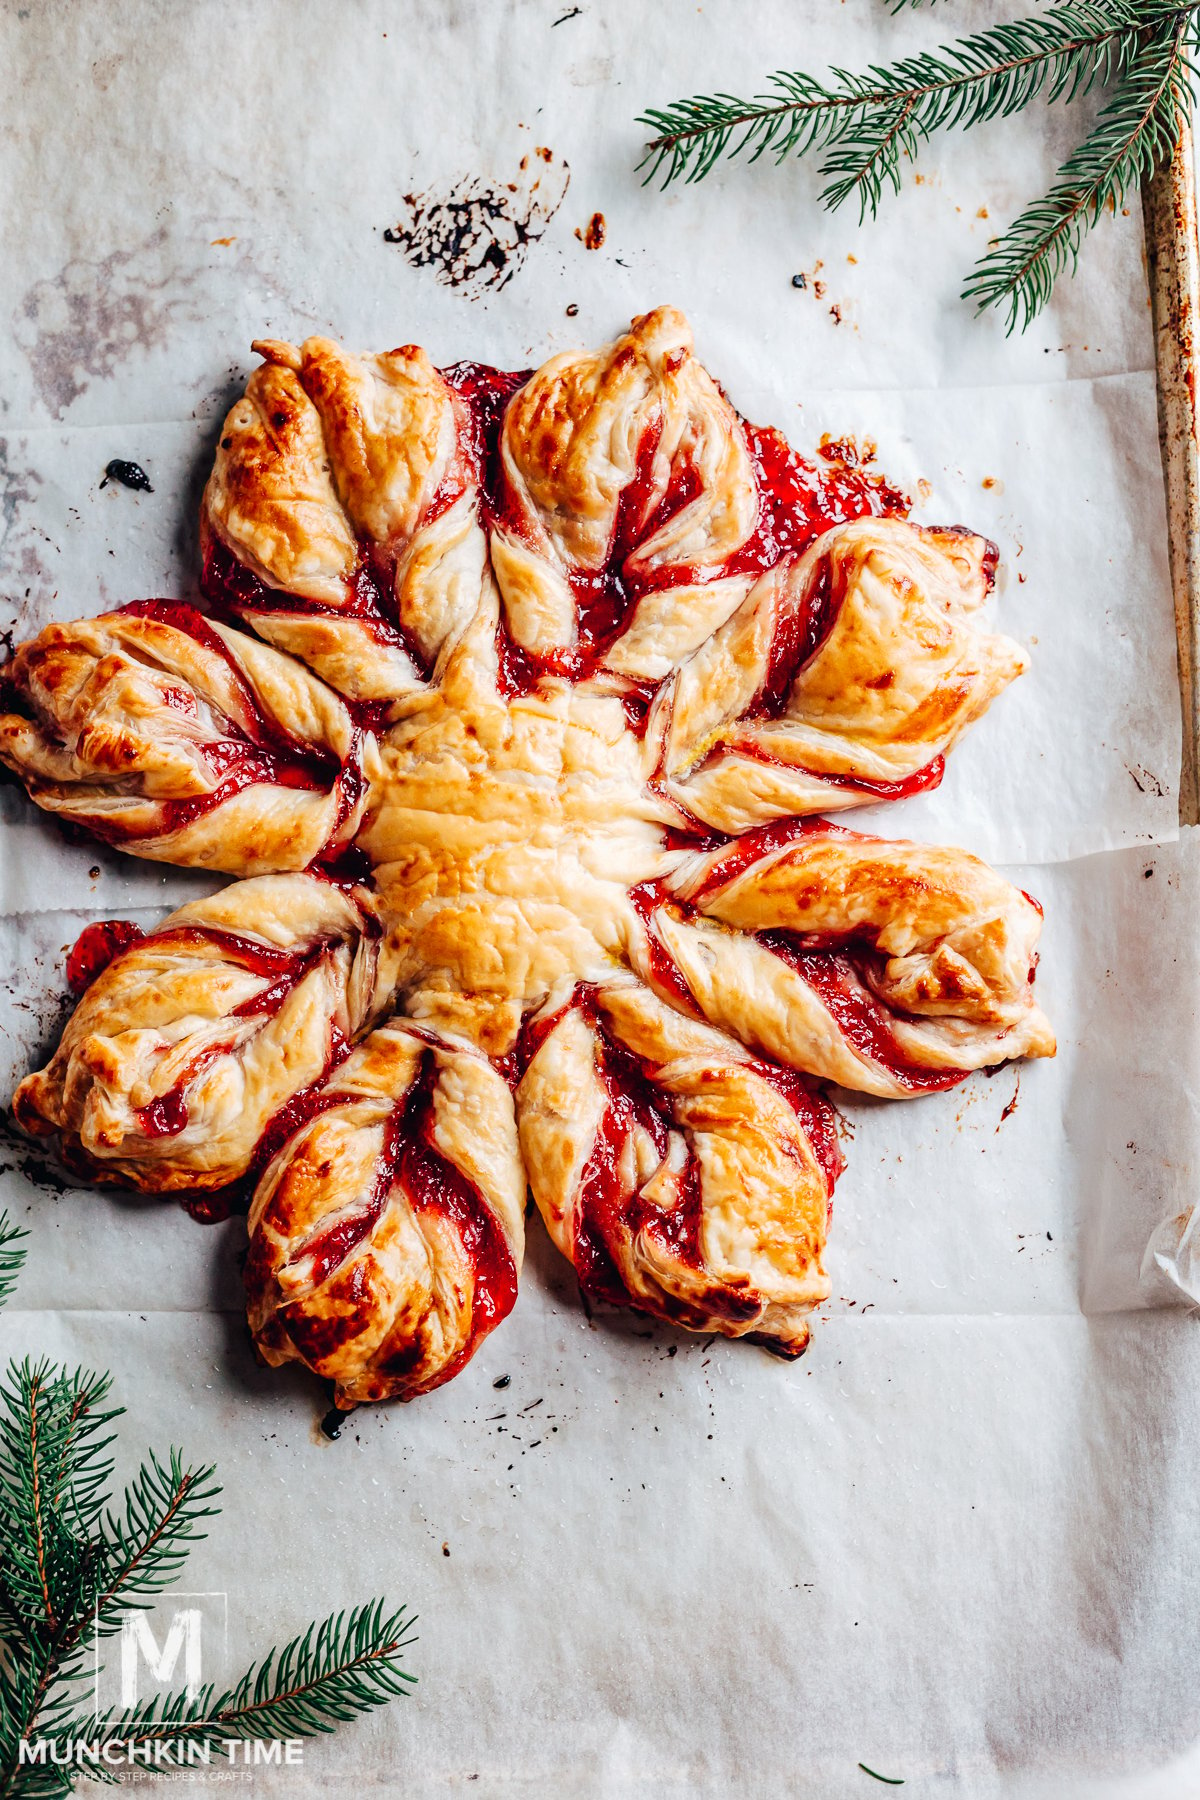 How to Make Strawberry Puff Pastry Dessert - Snowflake